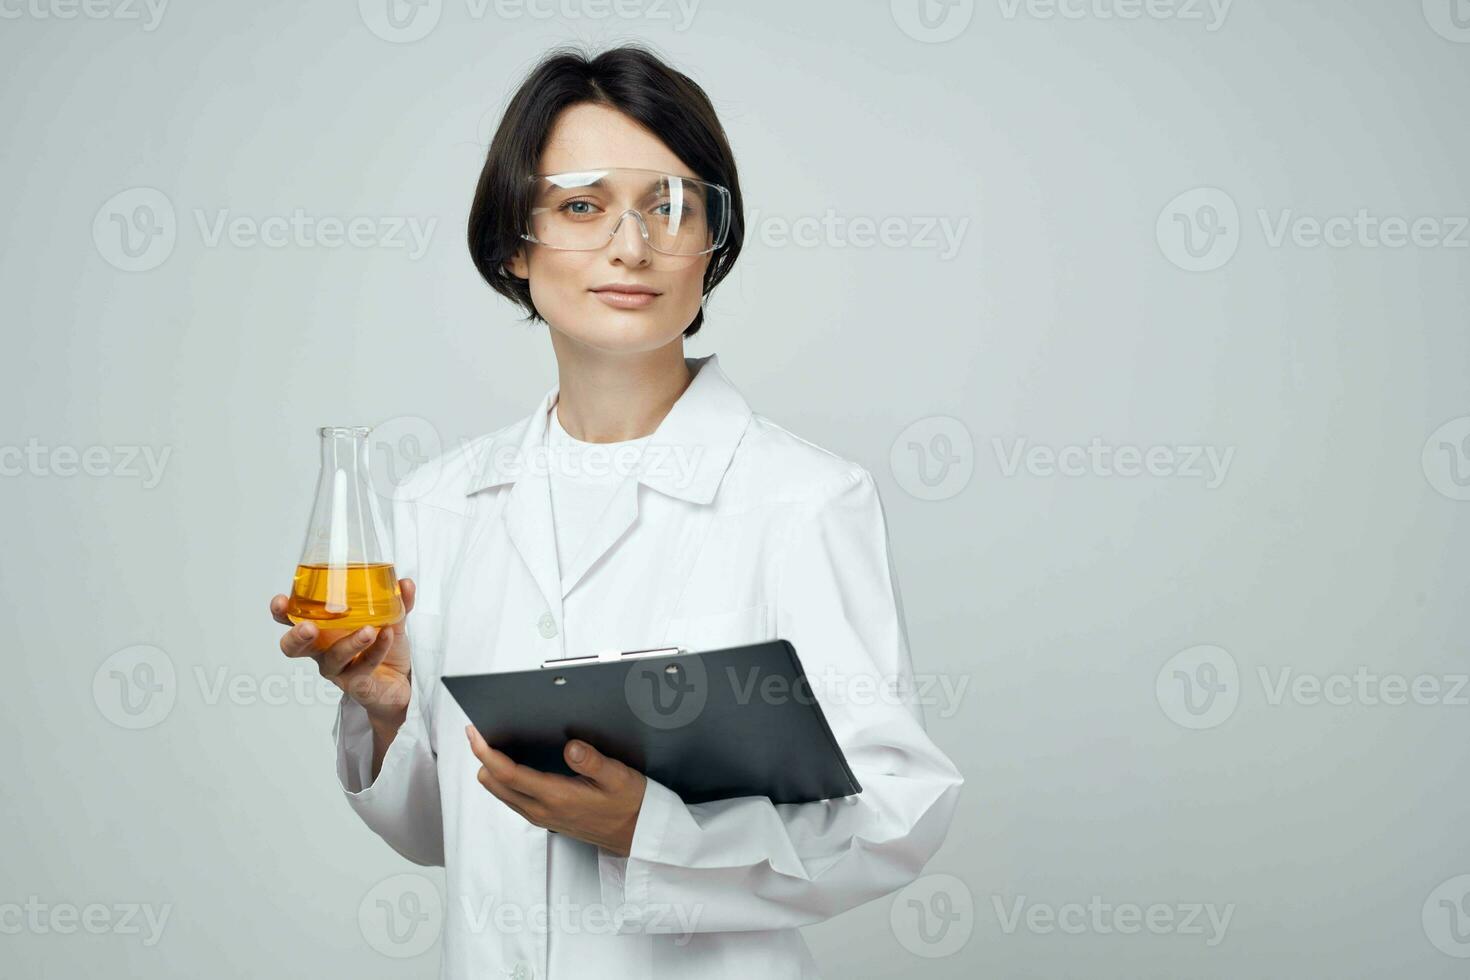 woman laboratory assistant science chemical solution research technology photo